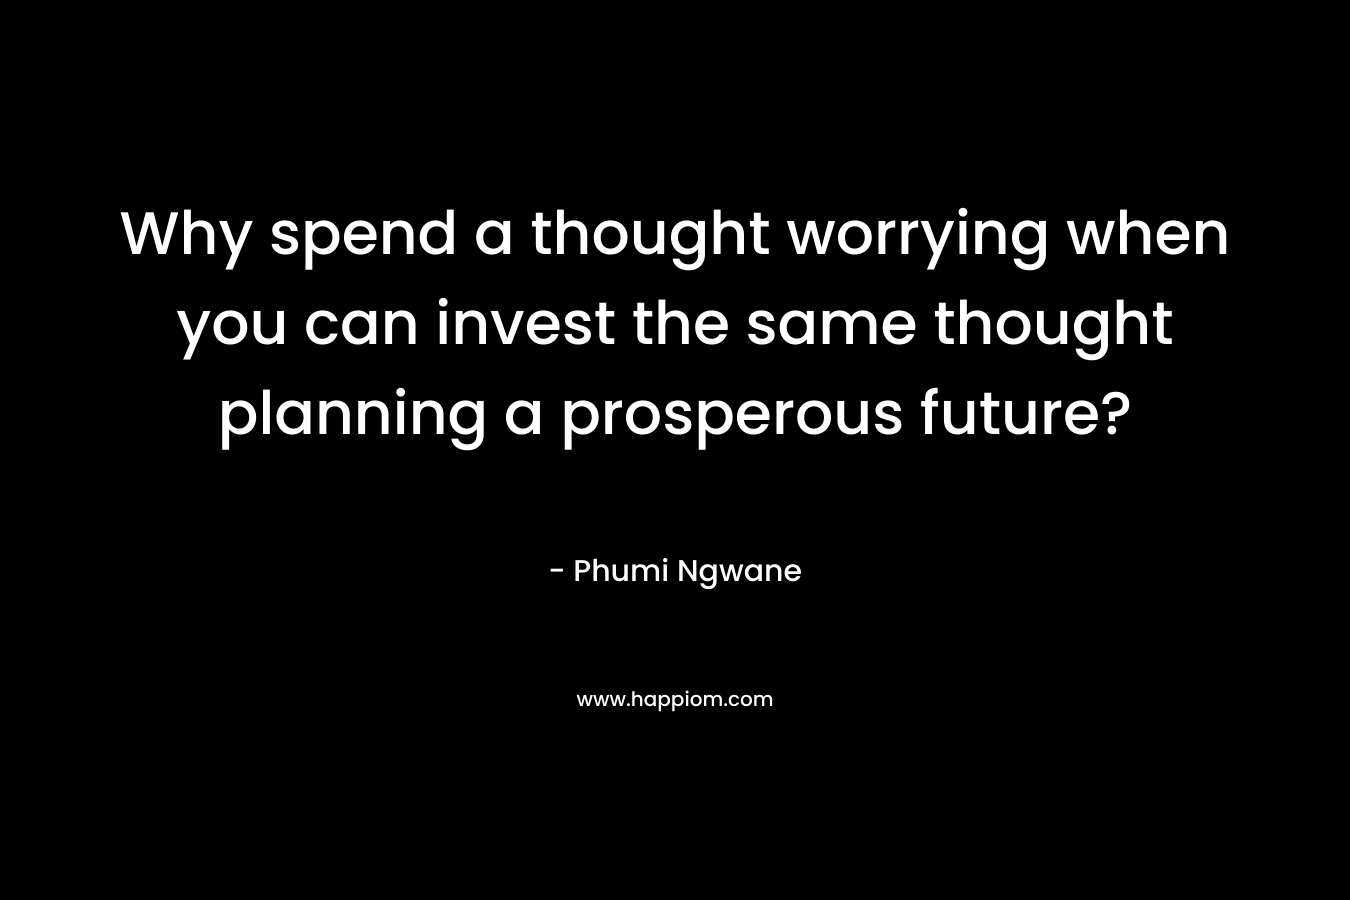 Why spend a thought worrying when you can invest the same thought planning a prosperous future? – Phumi Ngwane